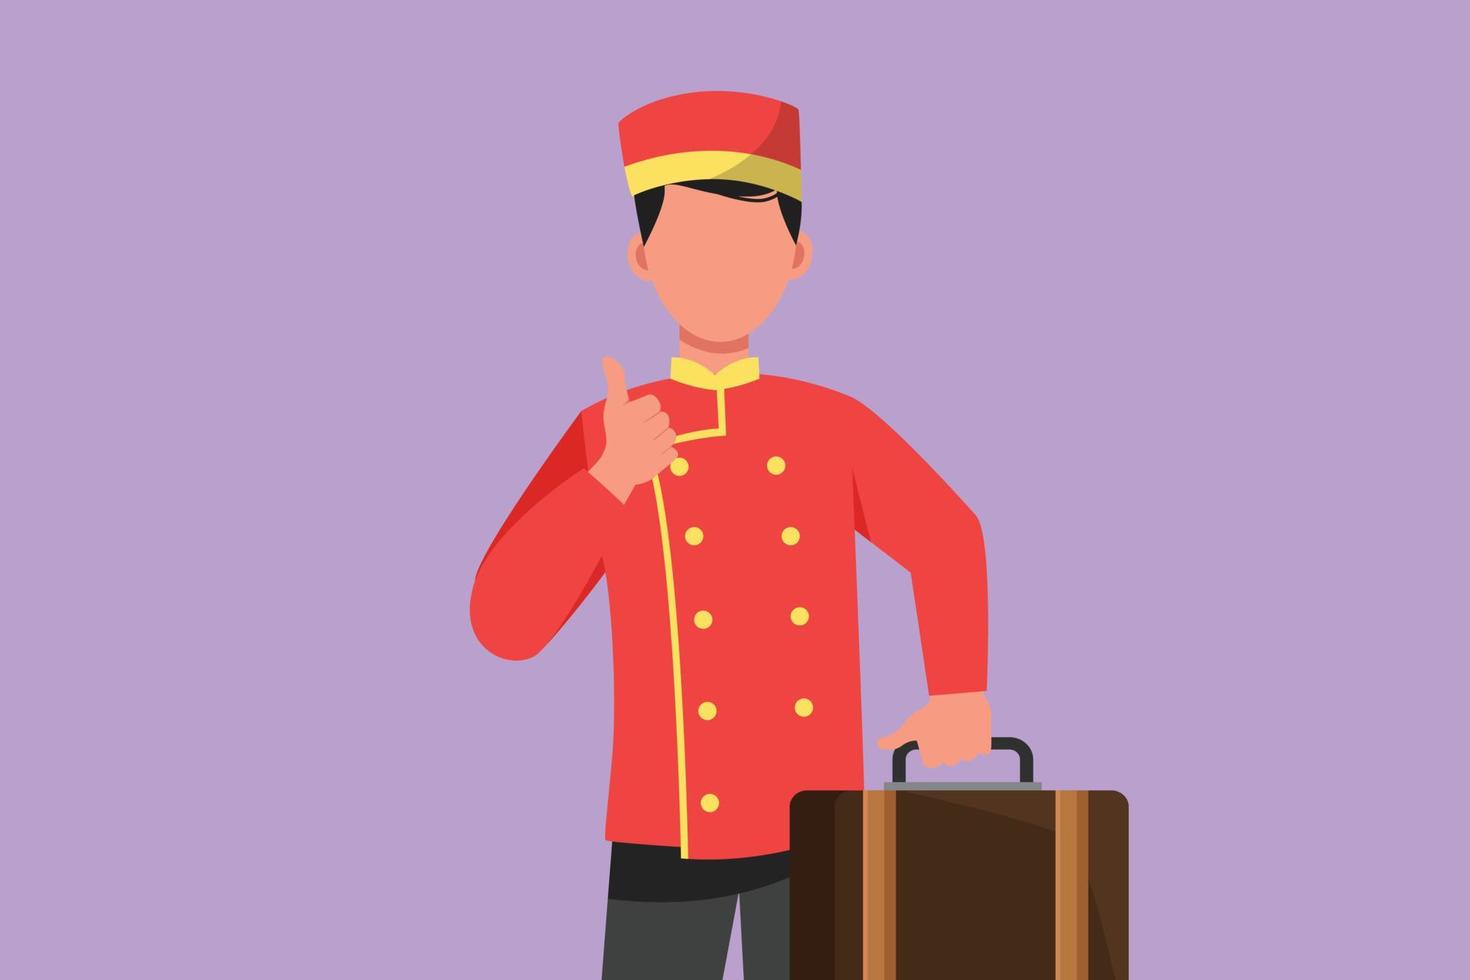 Character flat drawing hotel doorman in uniform held suitcase with thumbs up pose. Ready to serve guests in friendly and warm manner. Porter with great hospitality. Cartoon design vector illustration